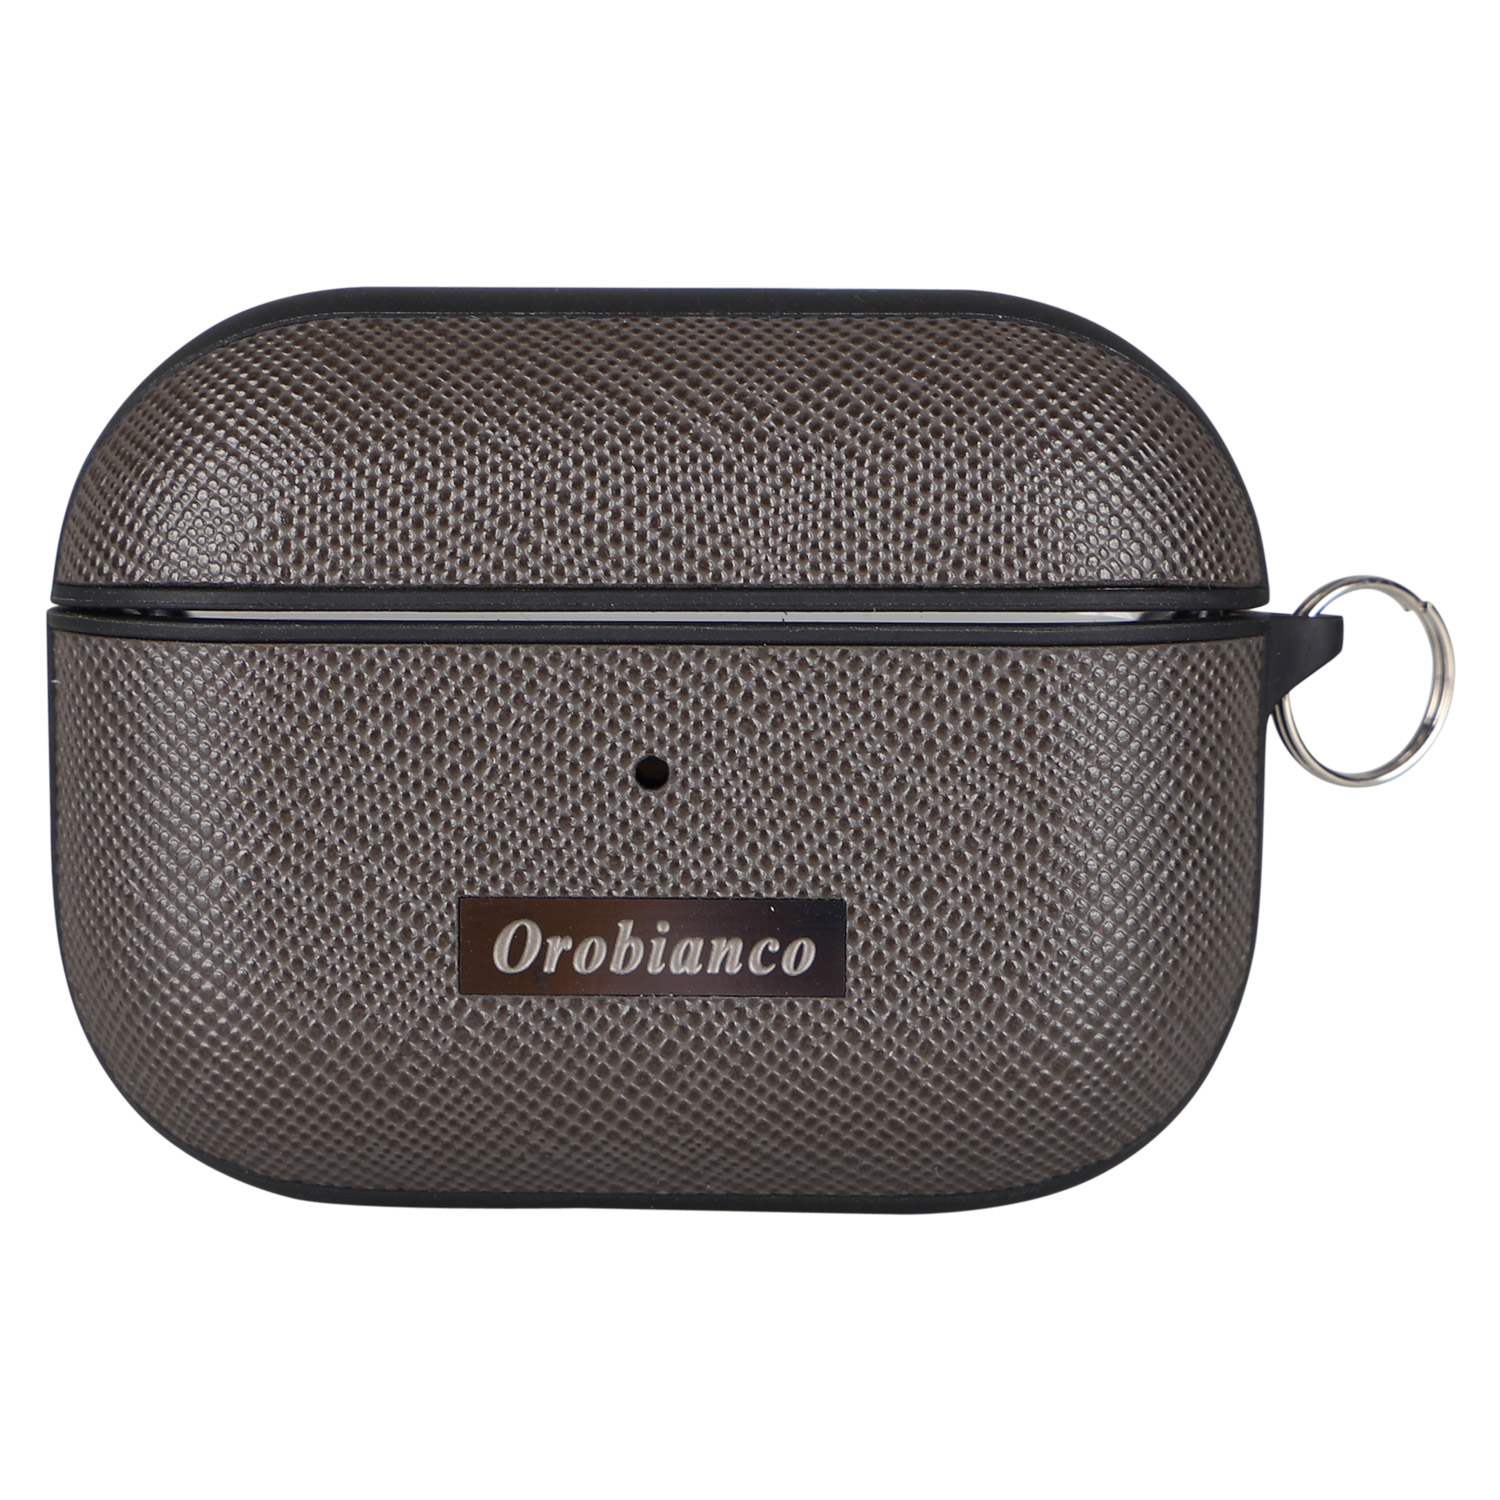 Orobianco オロビアンコ エアーポッズプロ AirPods Proケース カバー メンズ レディース PU LEATHER AIRPODS PRO CASE｜biget｜03